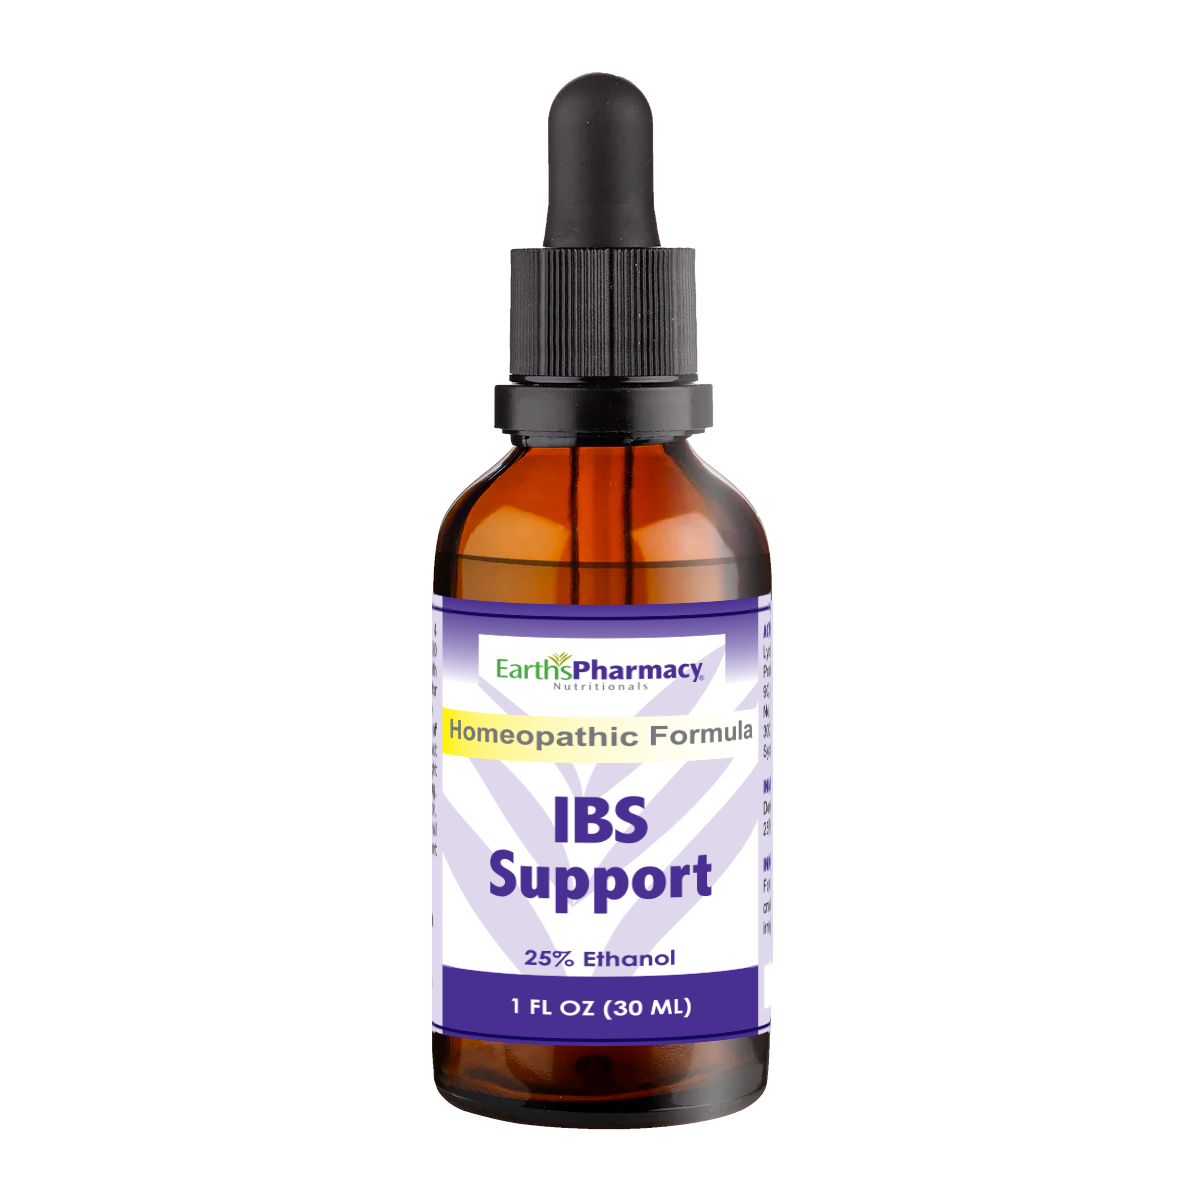 Irritable Bowel Syndrome (IBS) Support Formula Homeopathics